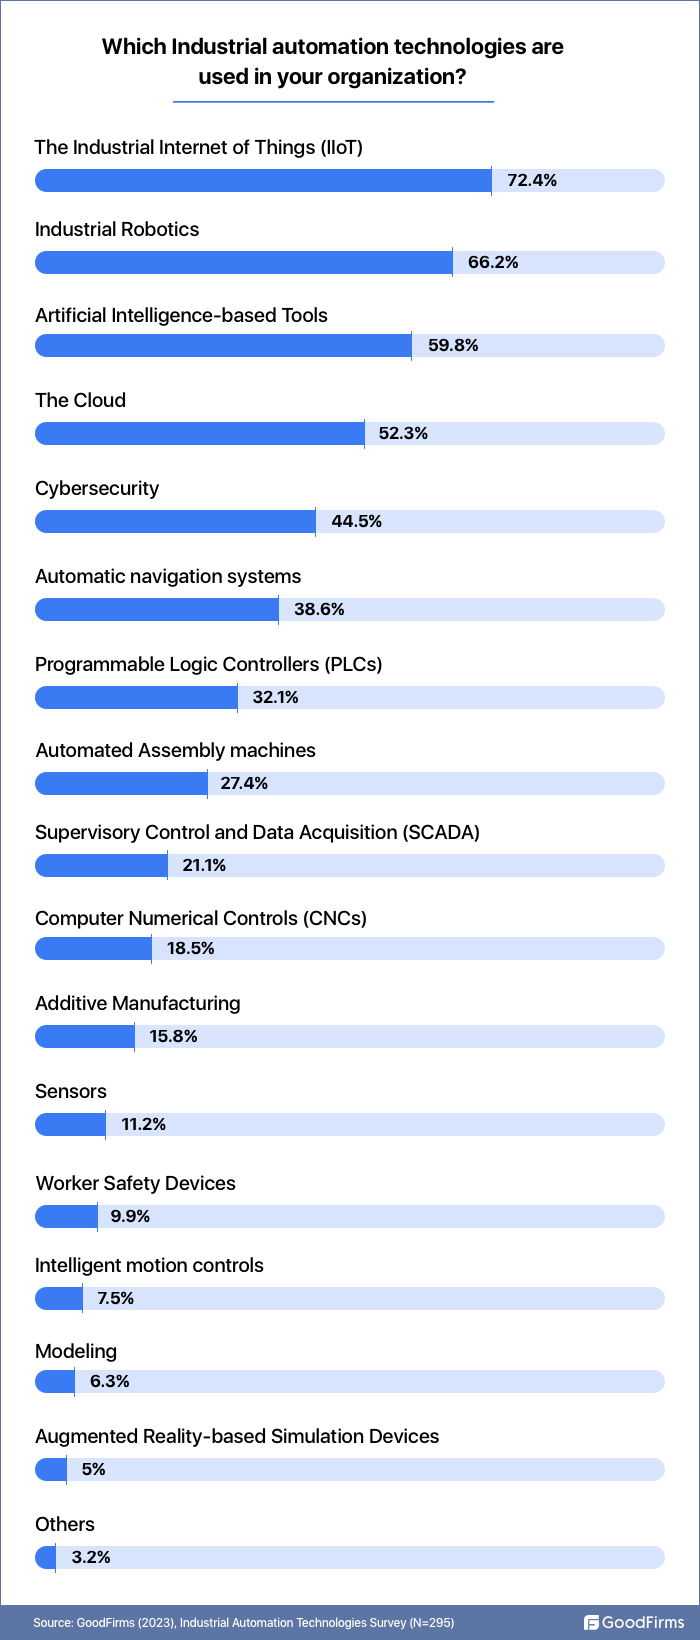 Which Industrial automation technologies are used in your organization?